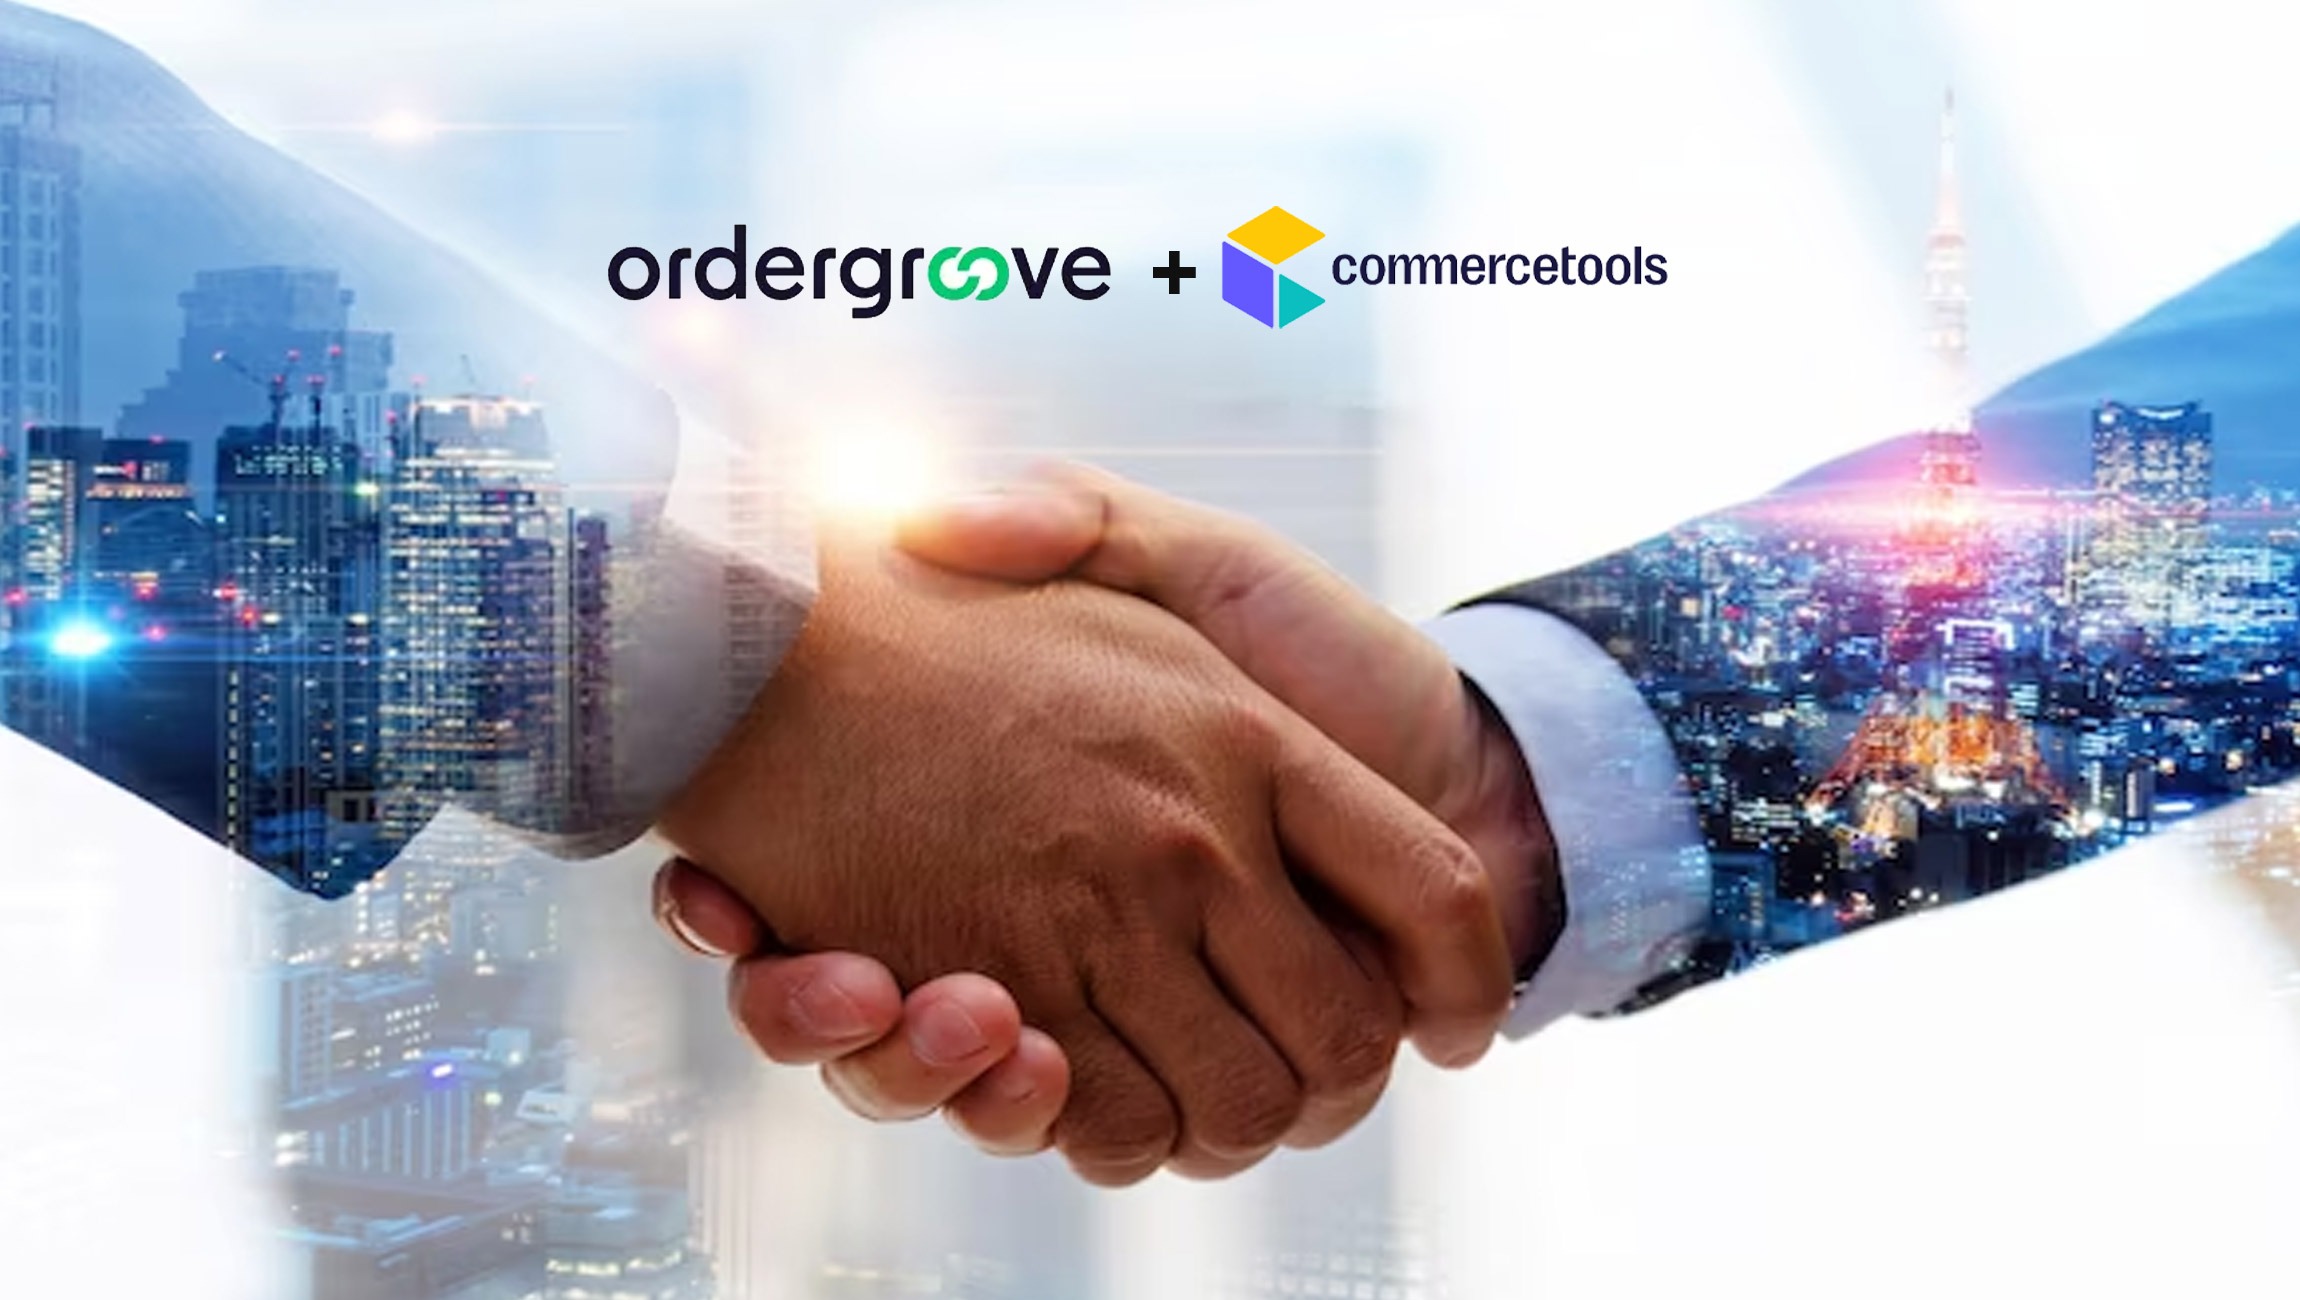 Ordergroove-and-commercetools-Partner-to-Power-Recurring-Revenue-for-Enterprise-Brands-and-Retailers